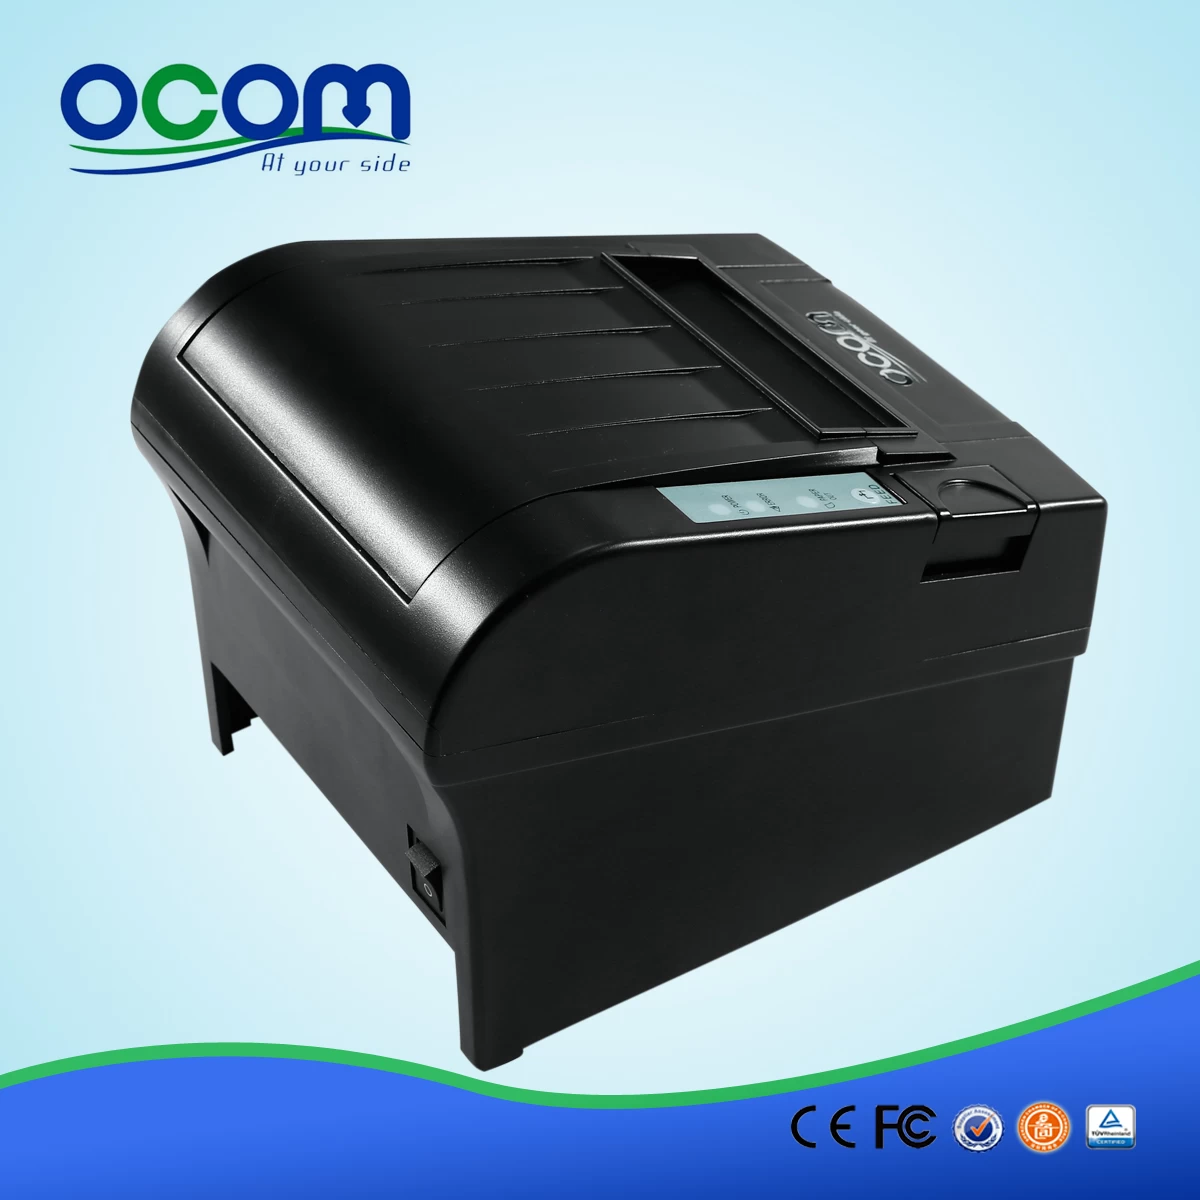 WIFI Thermal Printer 3 inch Android OS OCPP-806-W